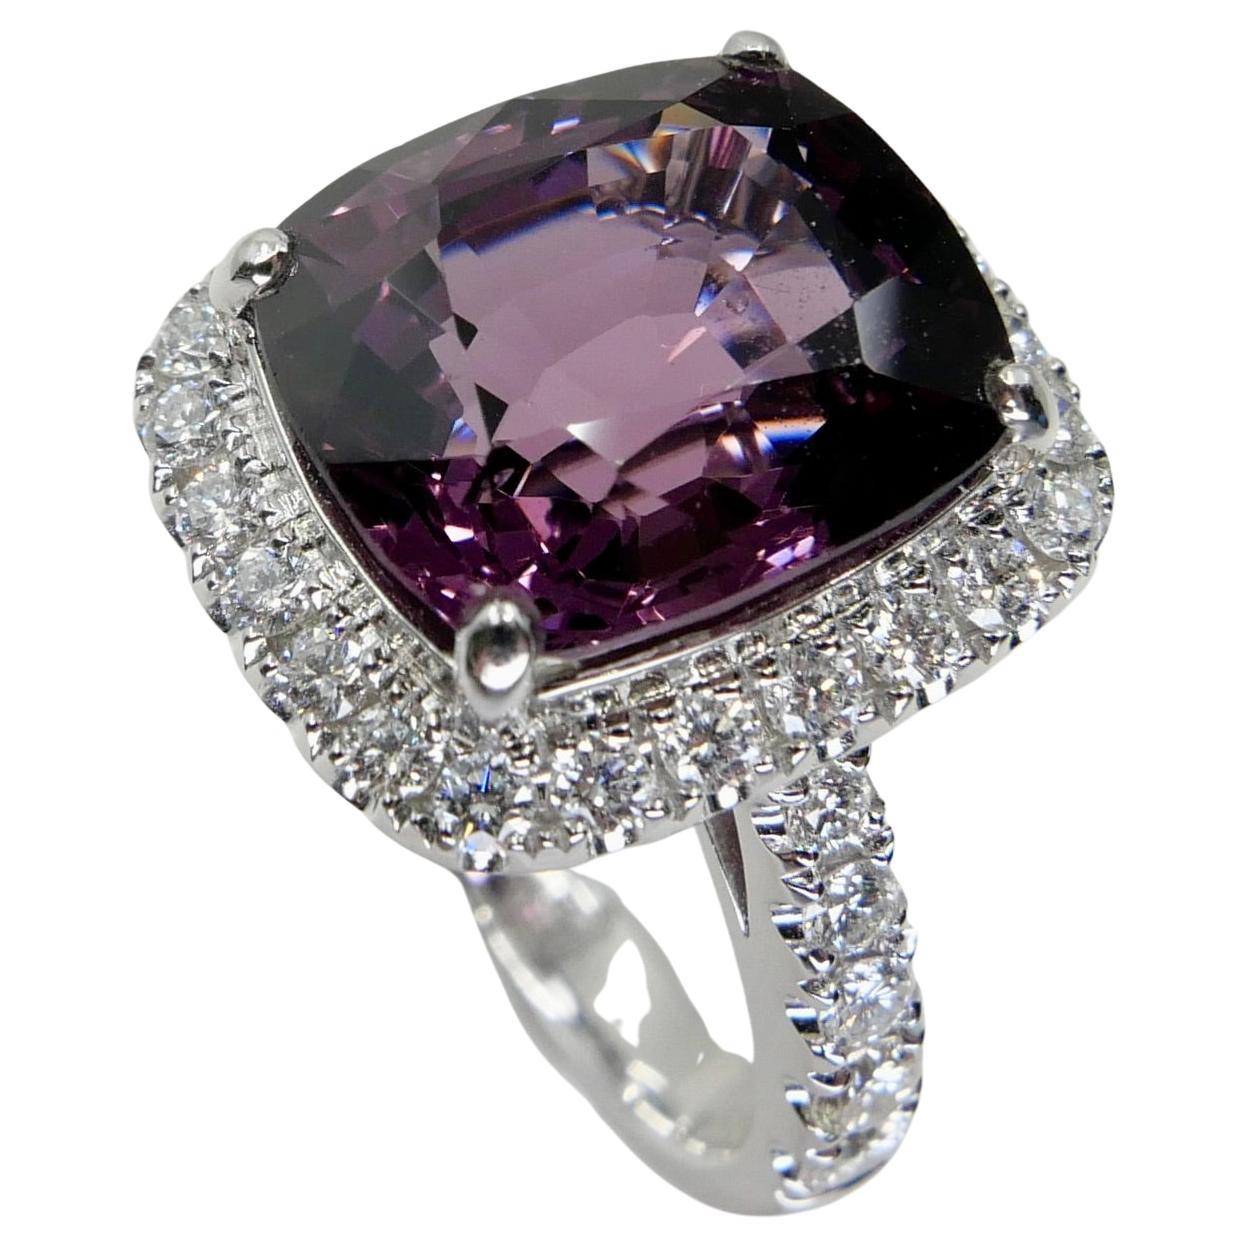 Certified Natural 9.18 Carat Vivid Purple No Heat Spinel & Diamond Cocktail Ring For Sale